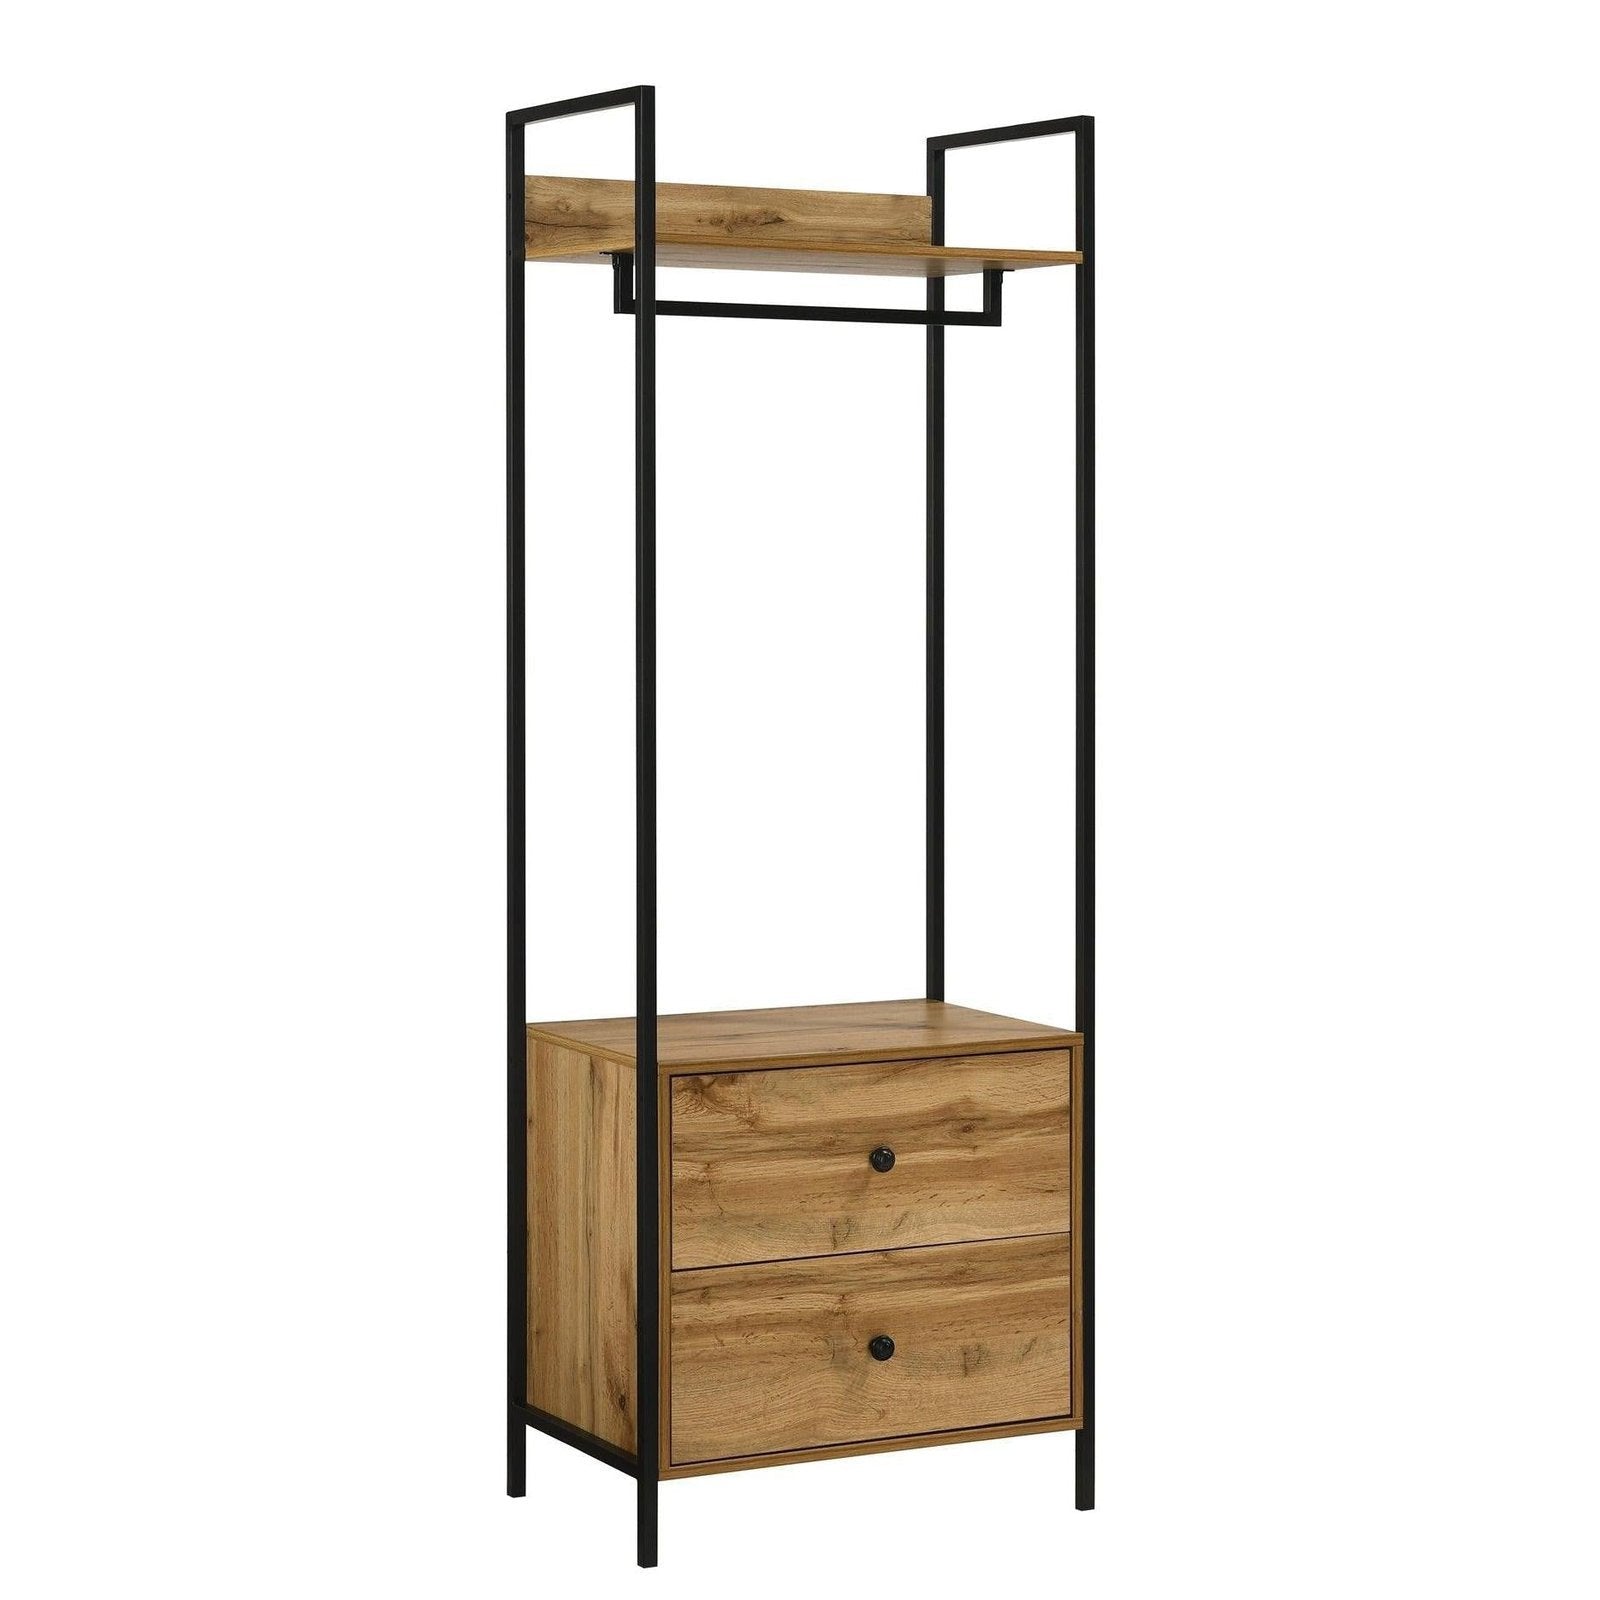 Zahra Open Wardrobe Drawers Hanging Rail allhomely